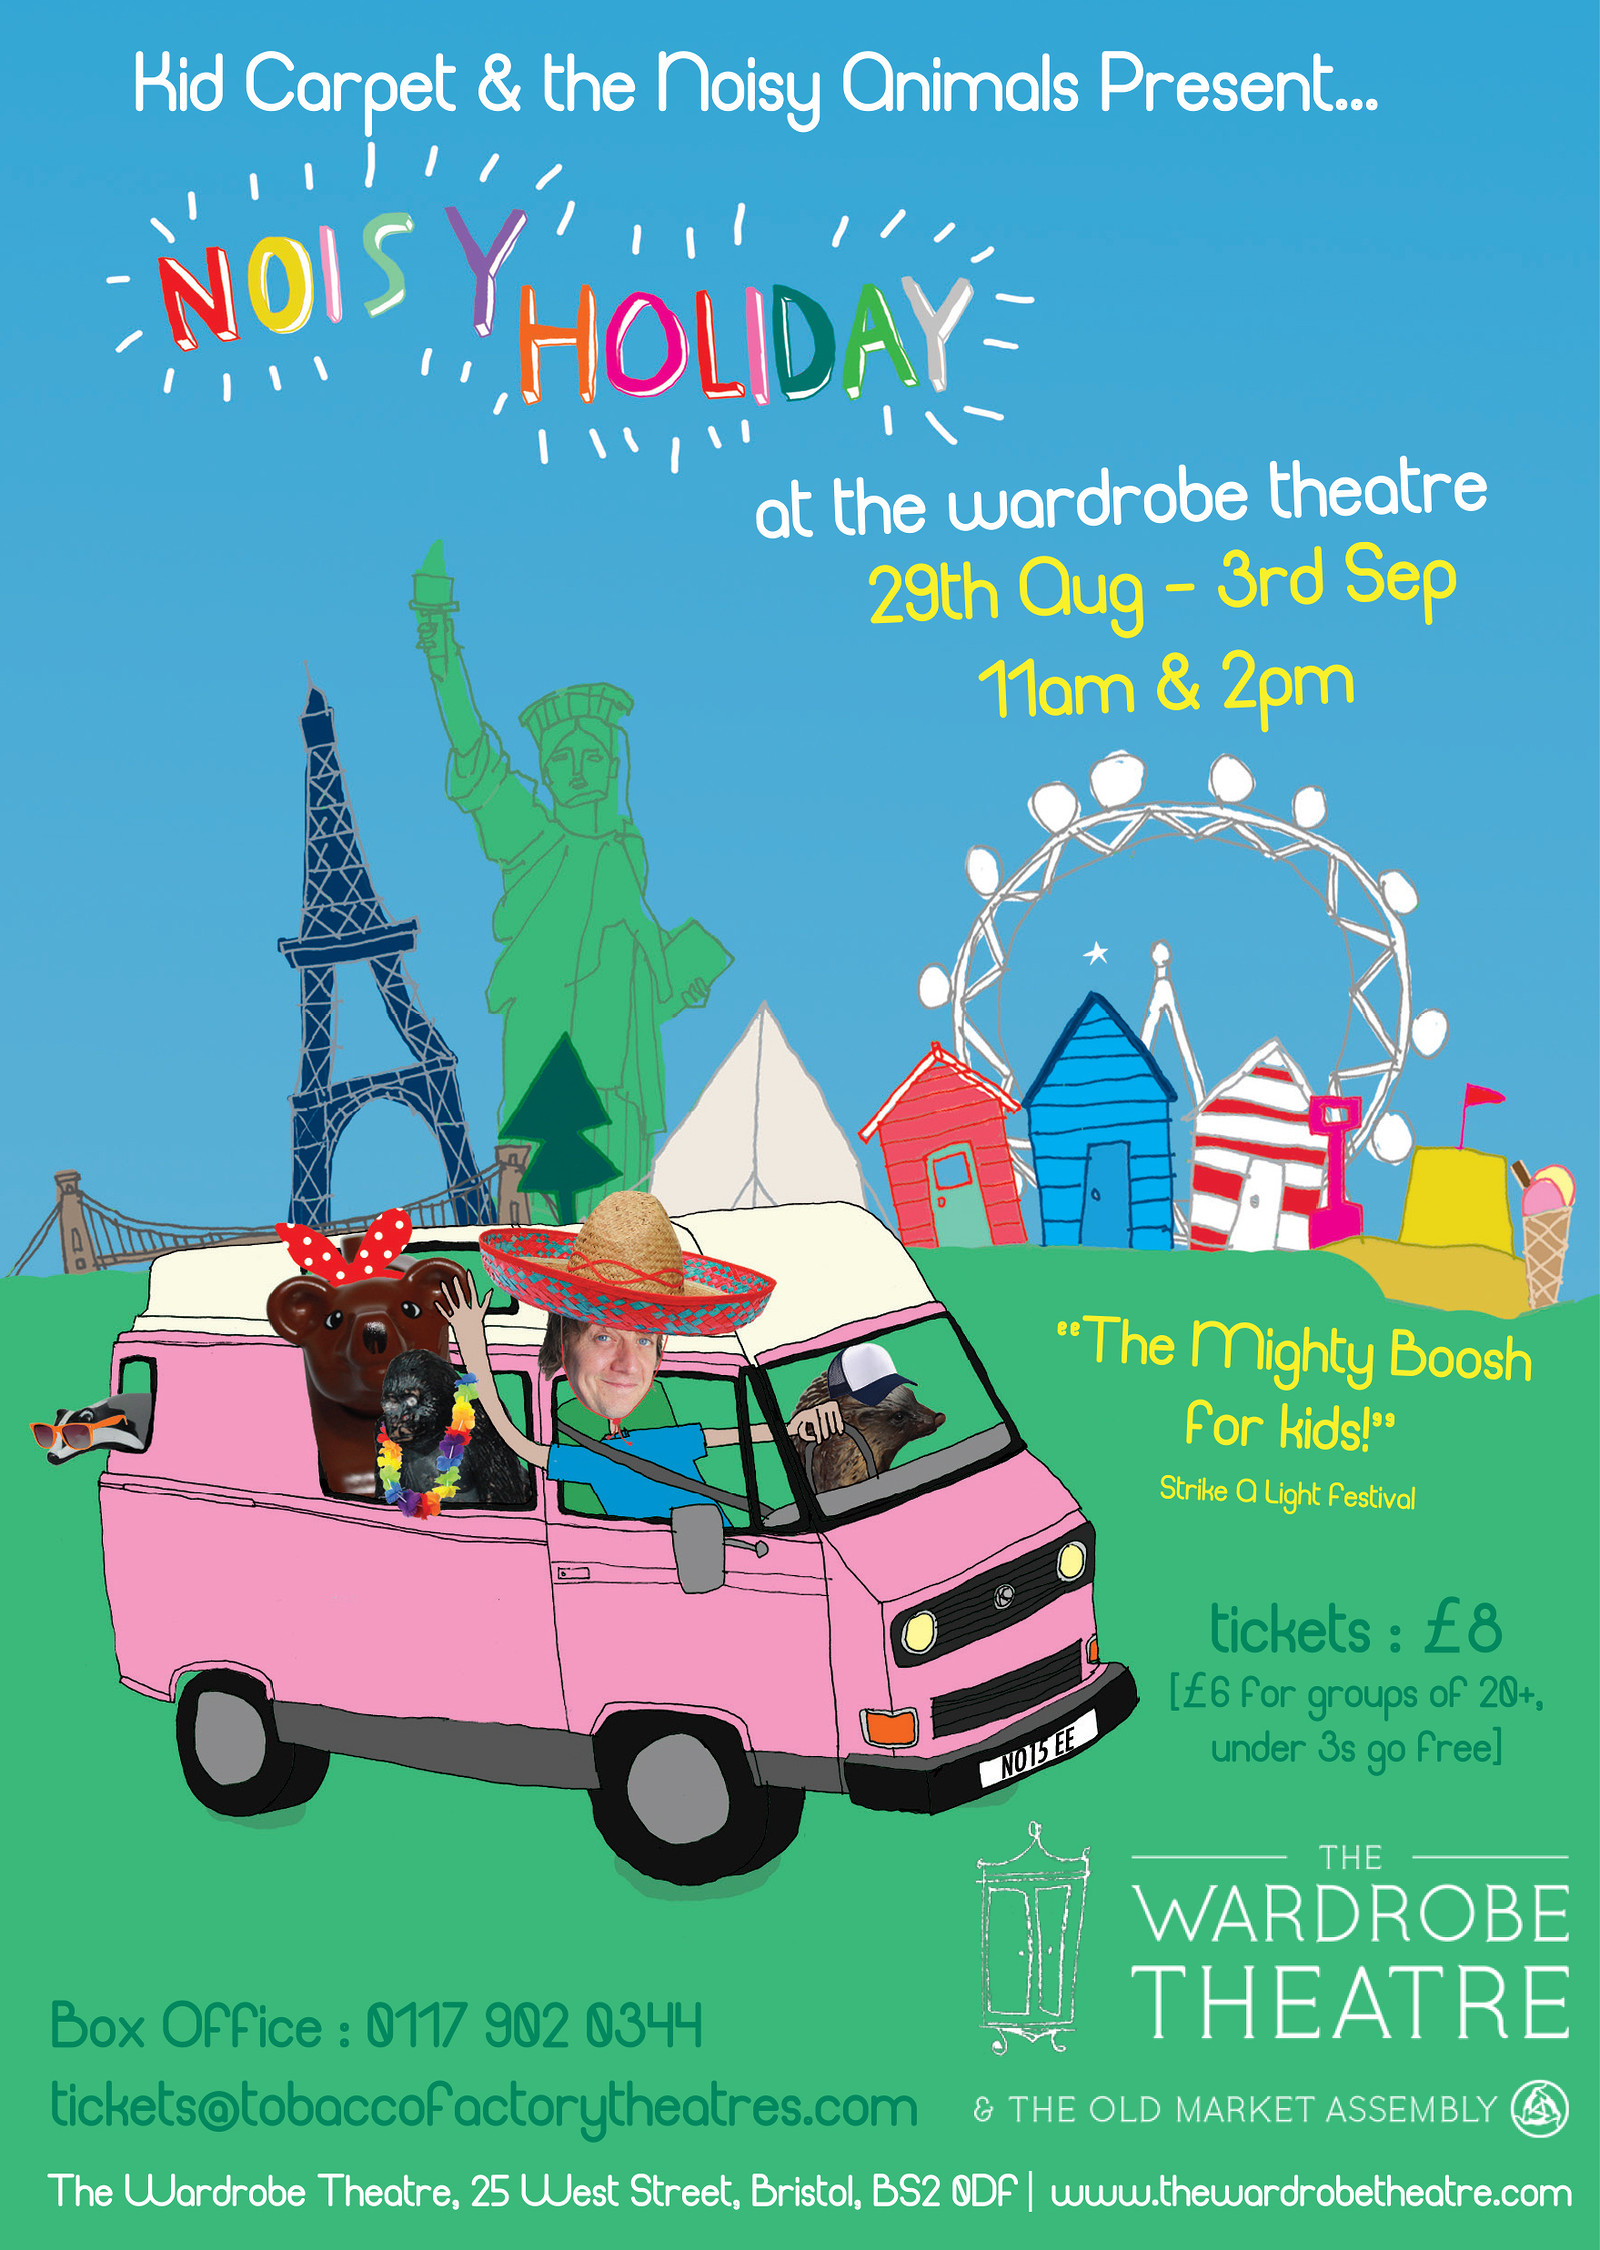 Noisy Holiday 29th Aug - 3rd Sep 11am & 2pm at The Wardrobe Theatre